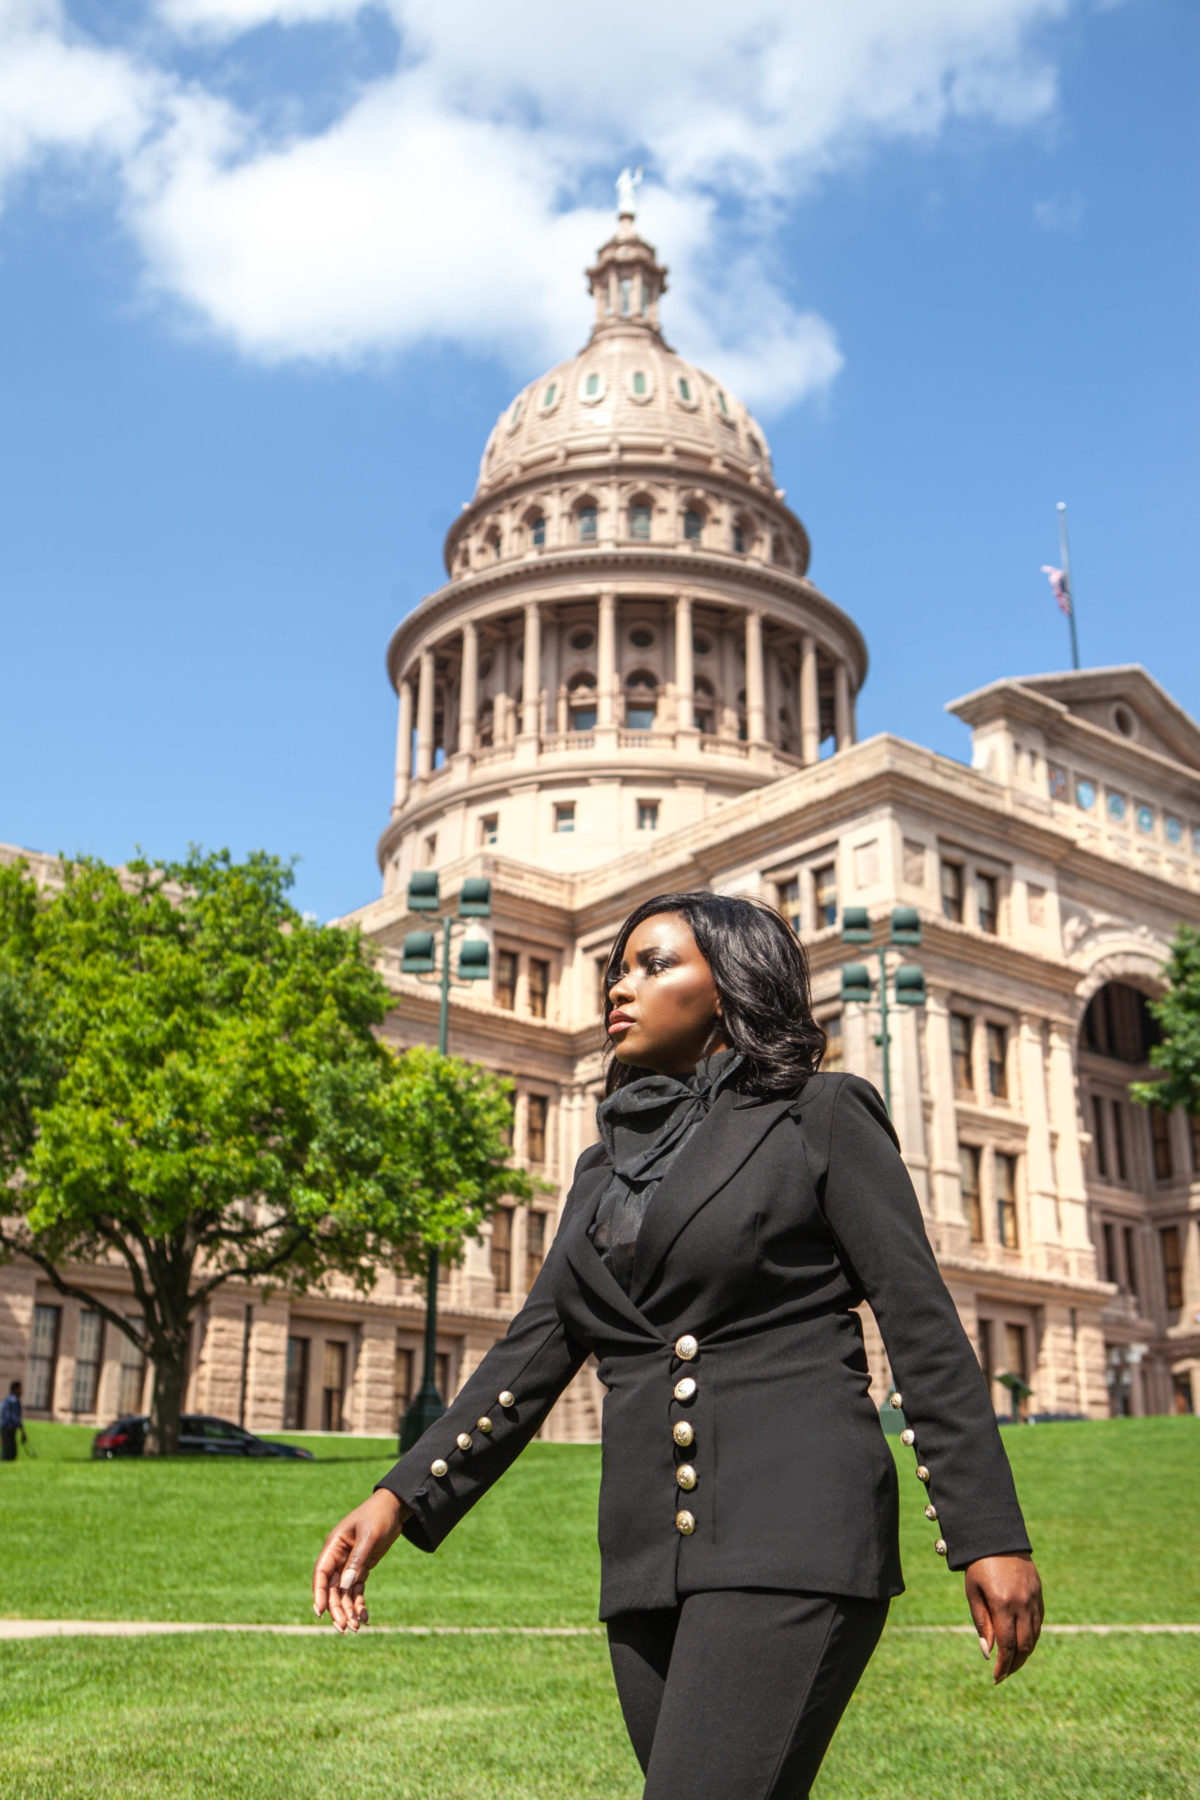 A woman in a suit walking past a government building